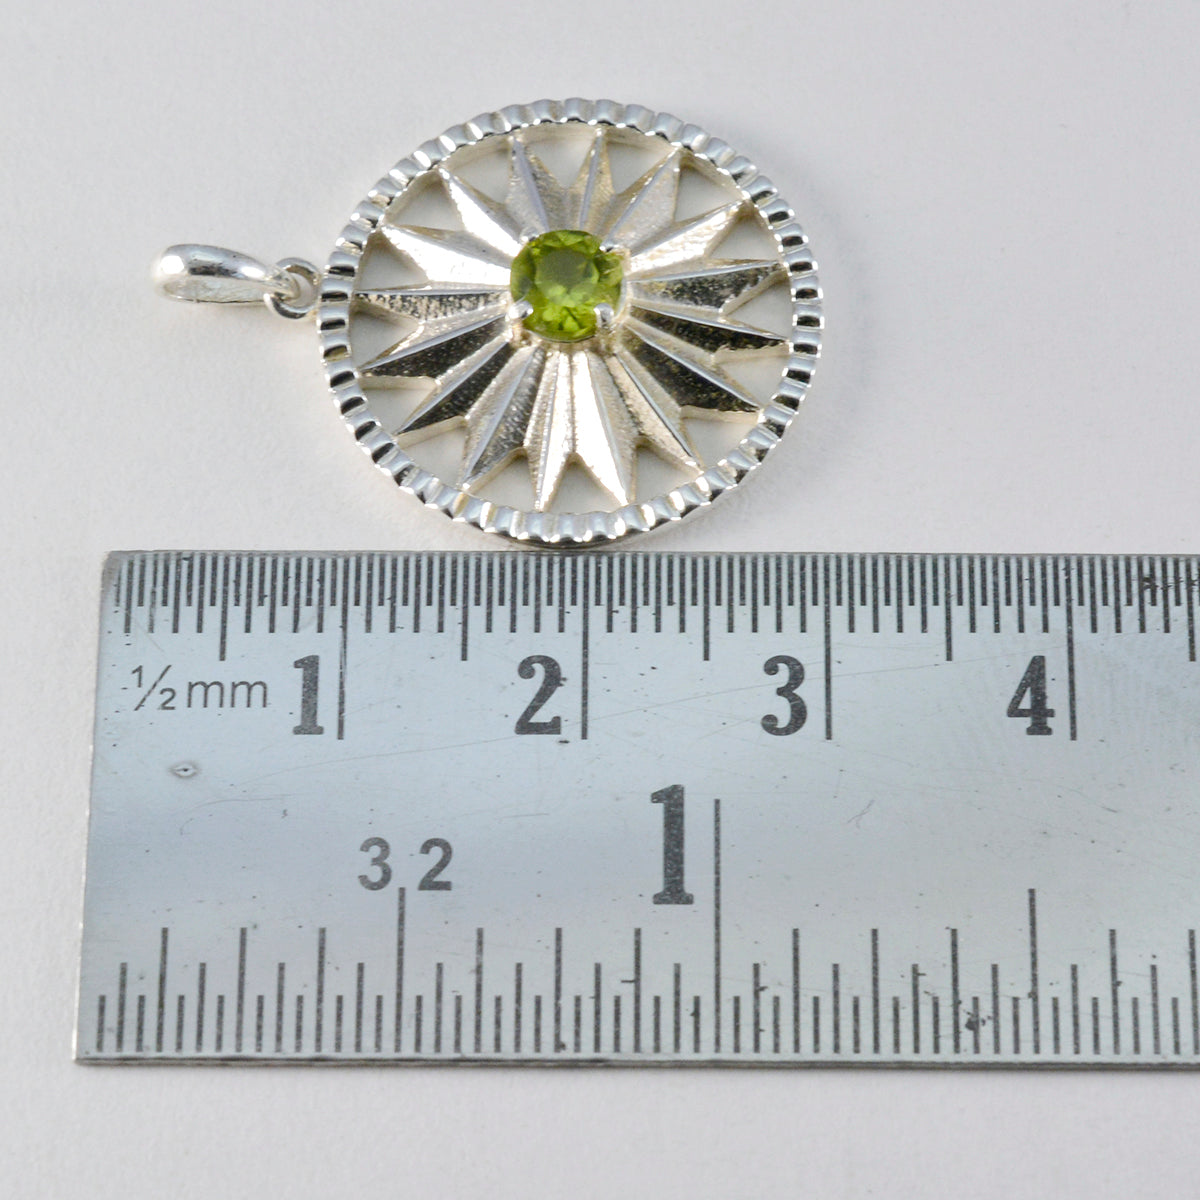 Riyo Nice Gemstone Round Faceted Green Peridot 984 Sterling Silver Pendant Gift For Girlfriend